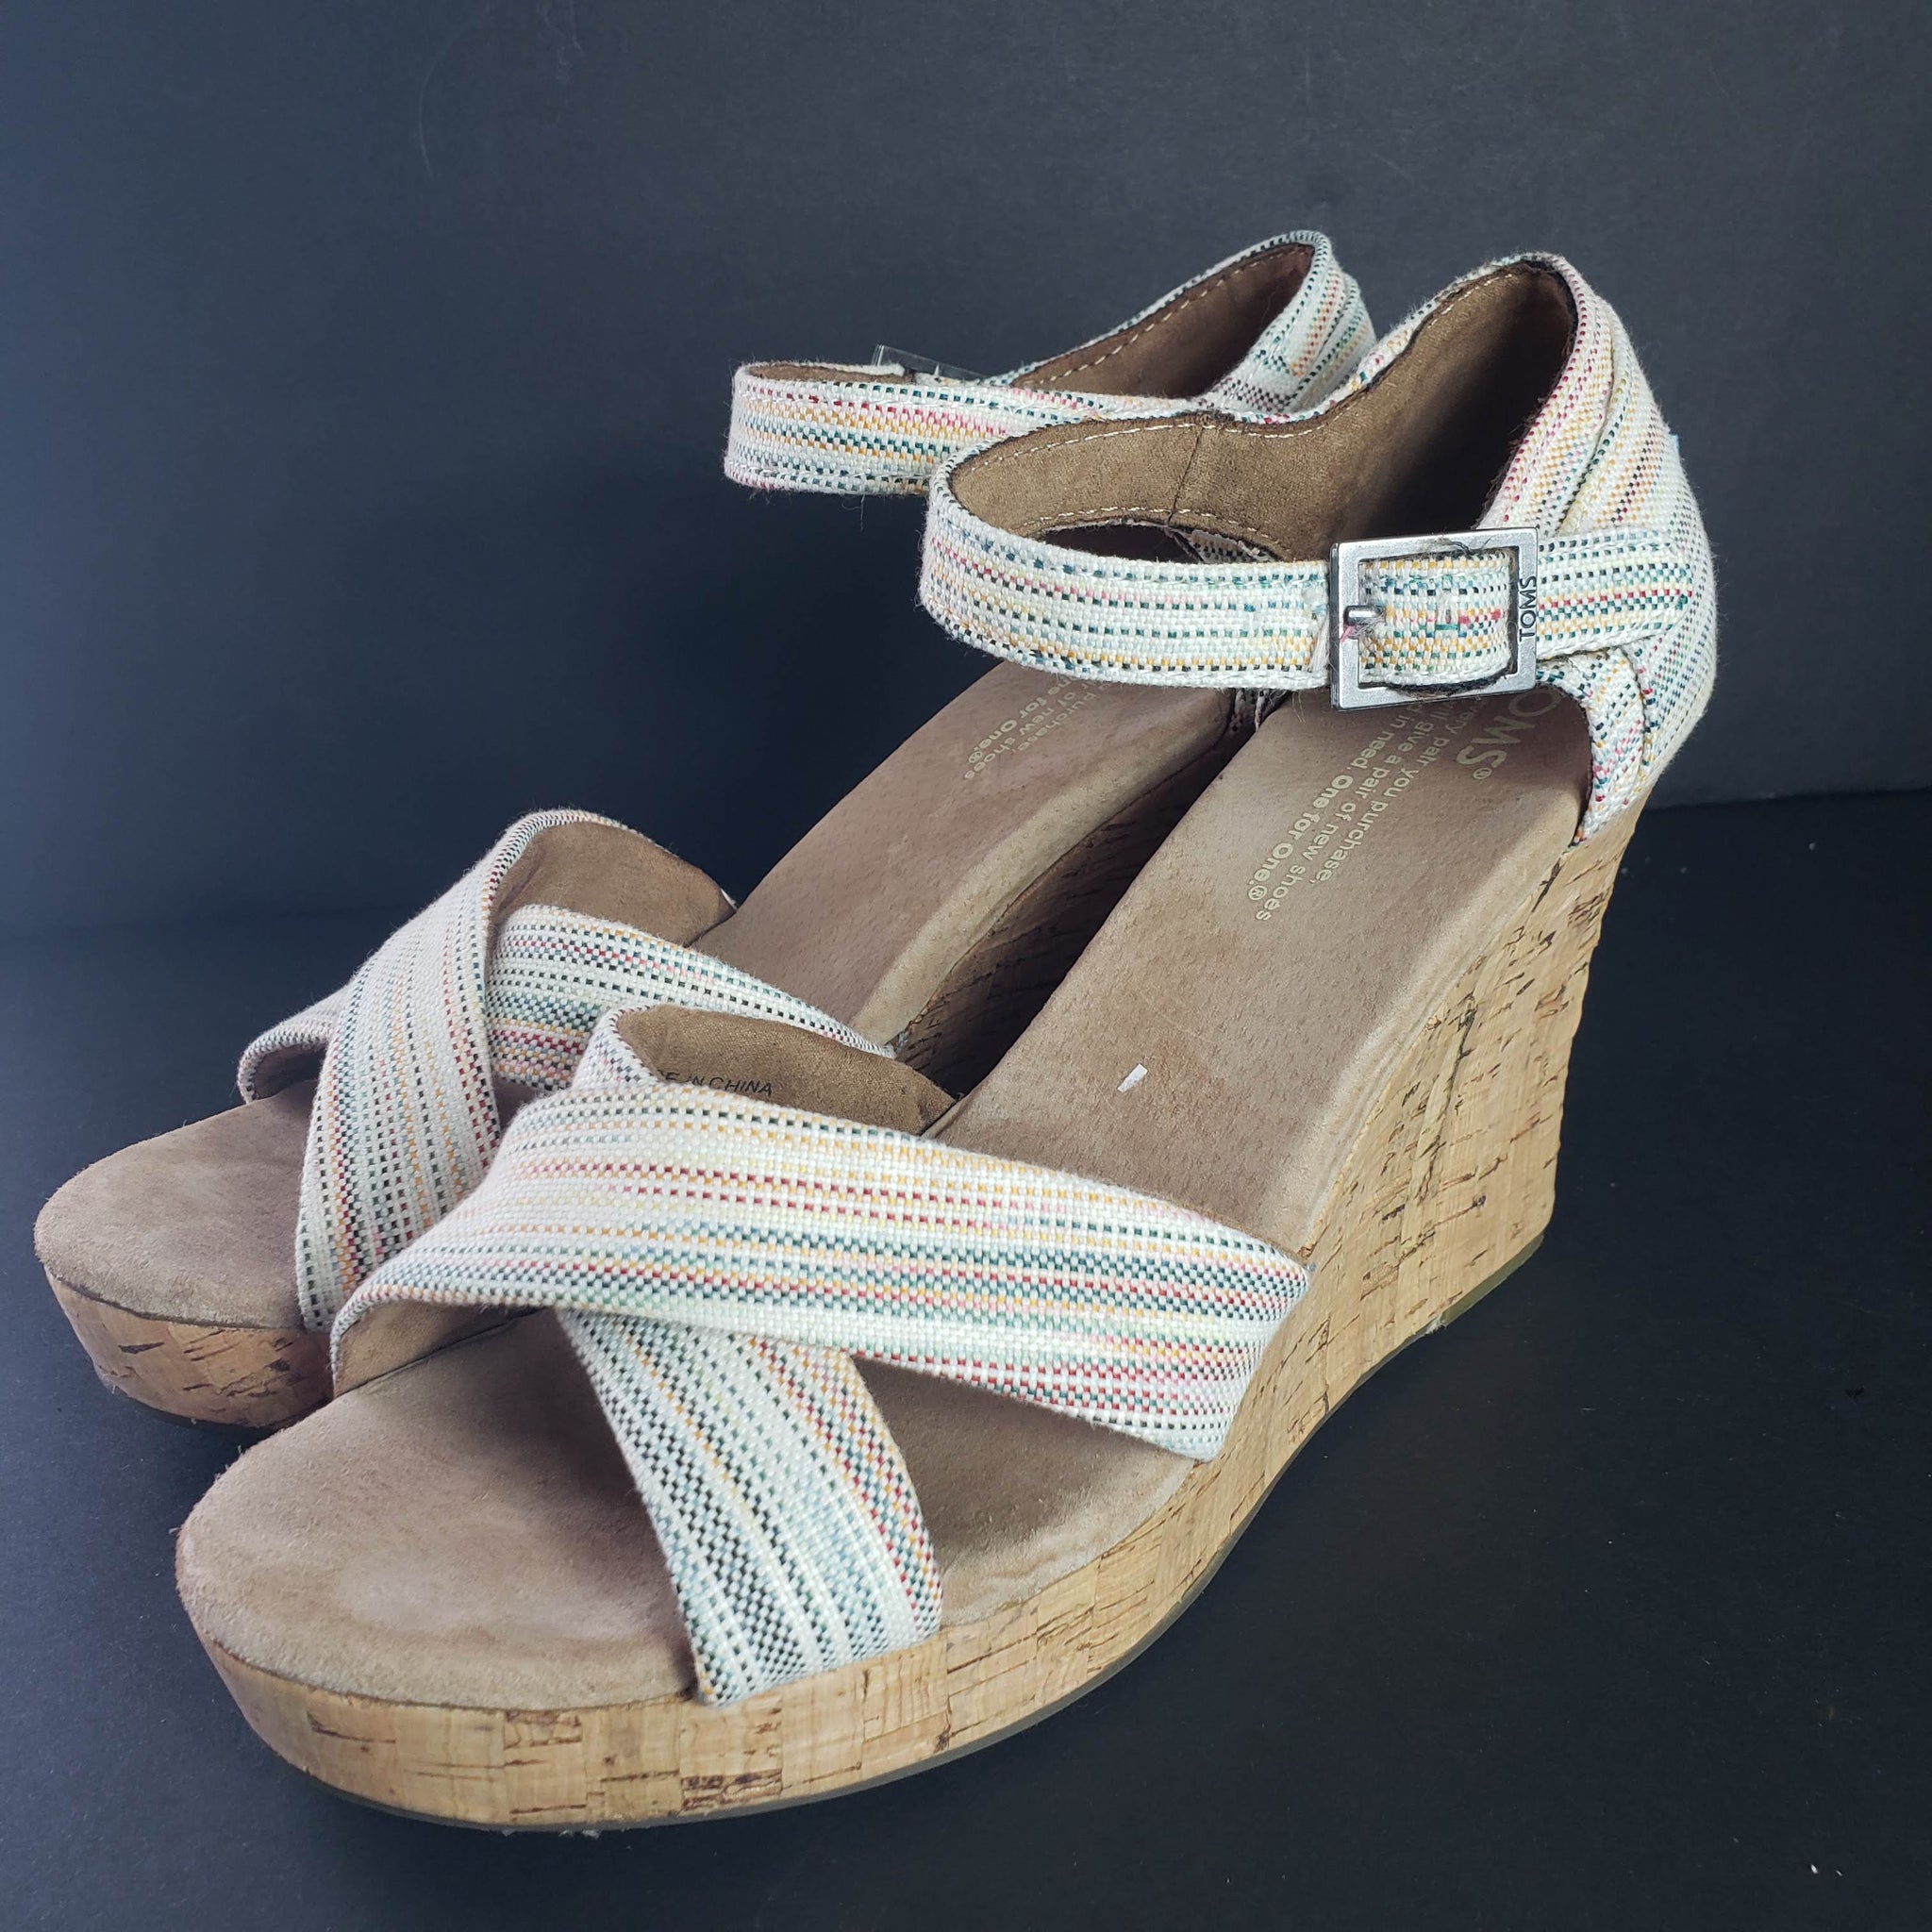 Toms Wedge Sandals Size 7.5